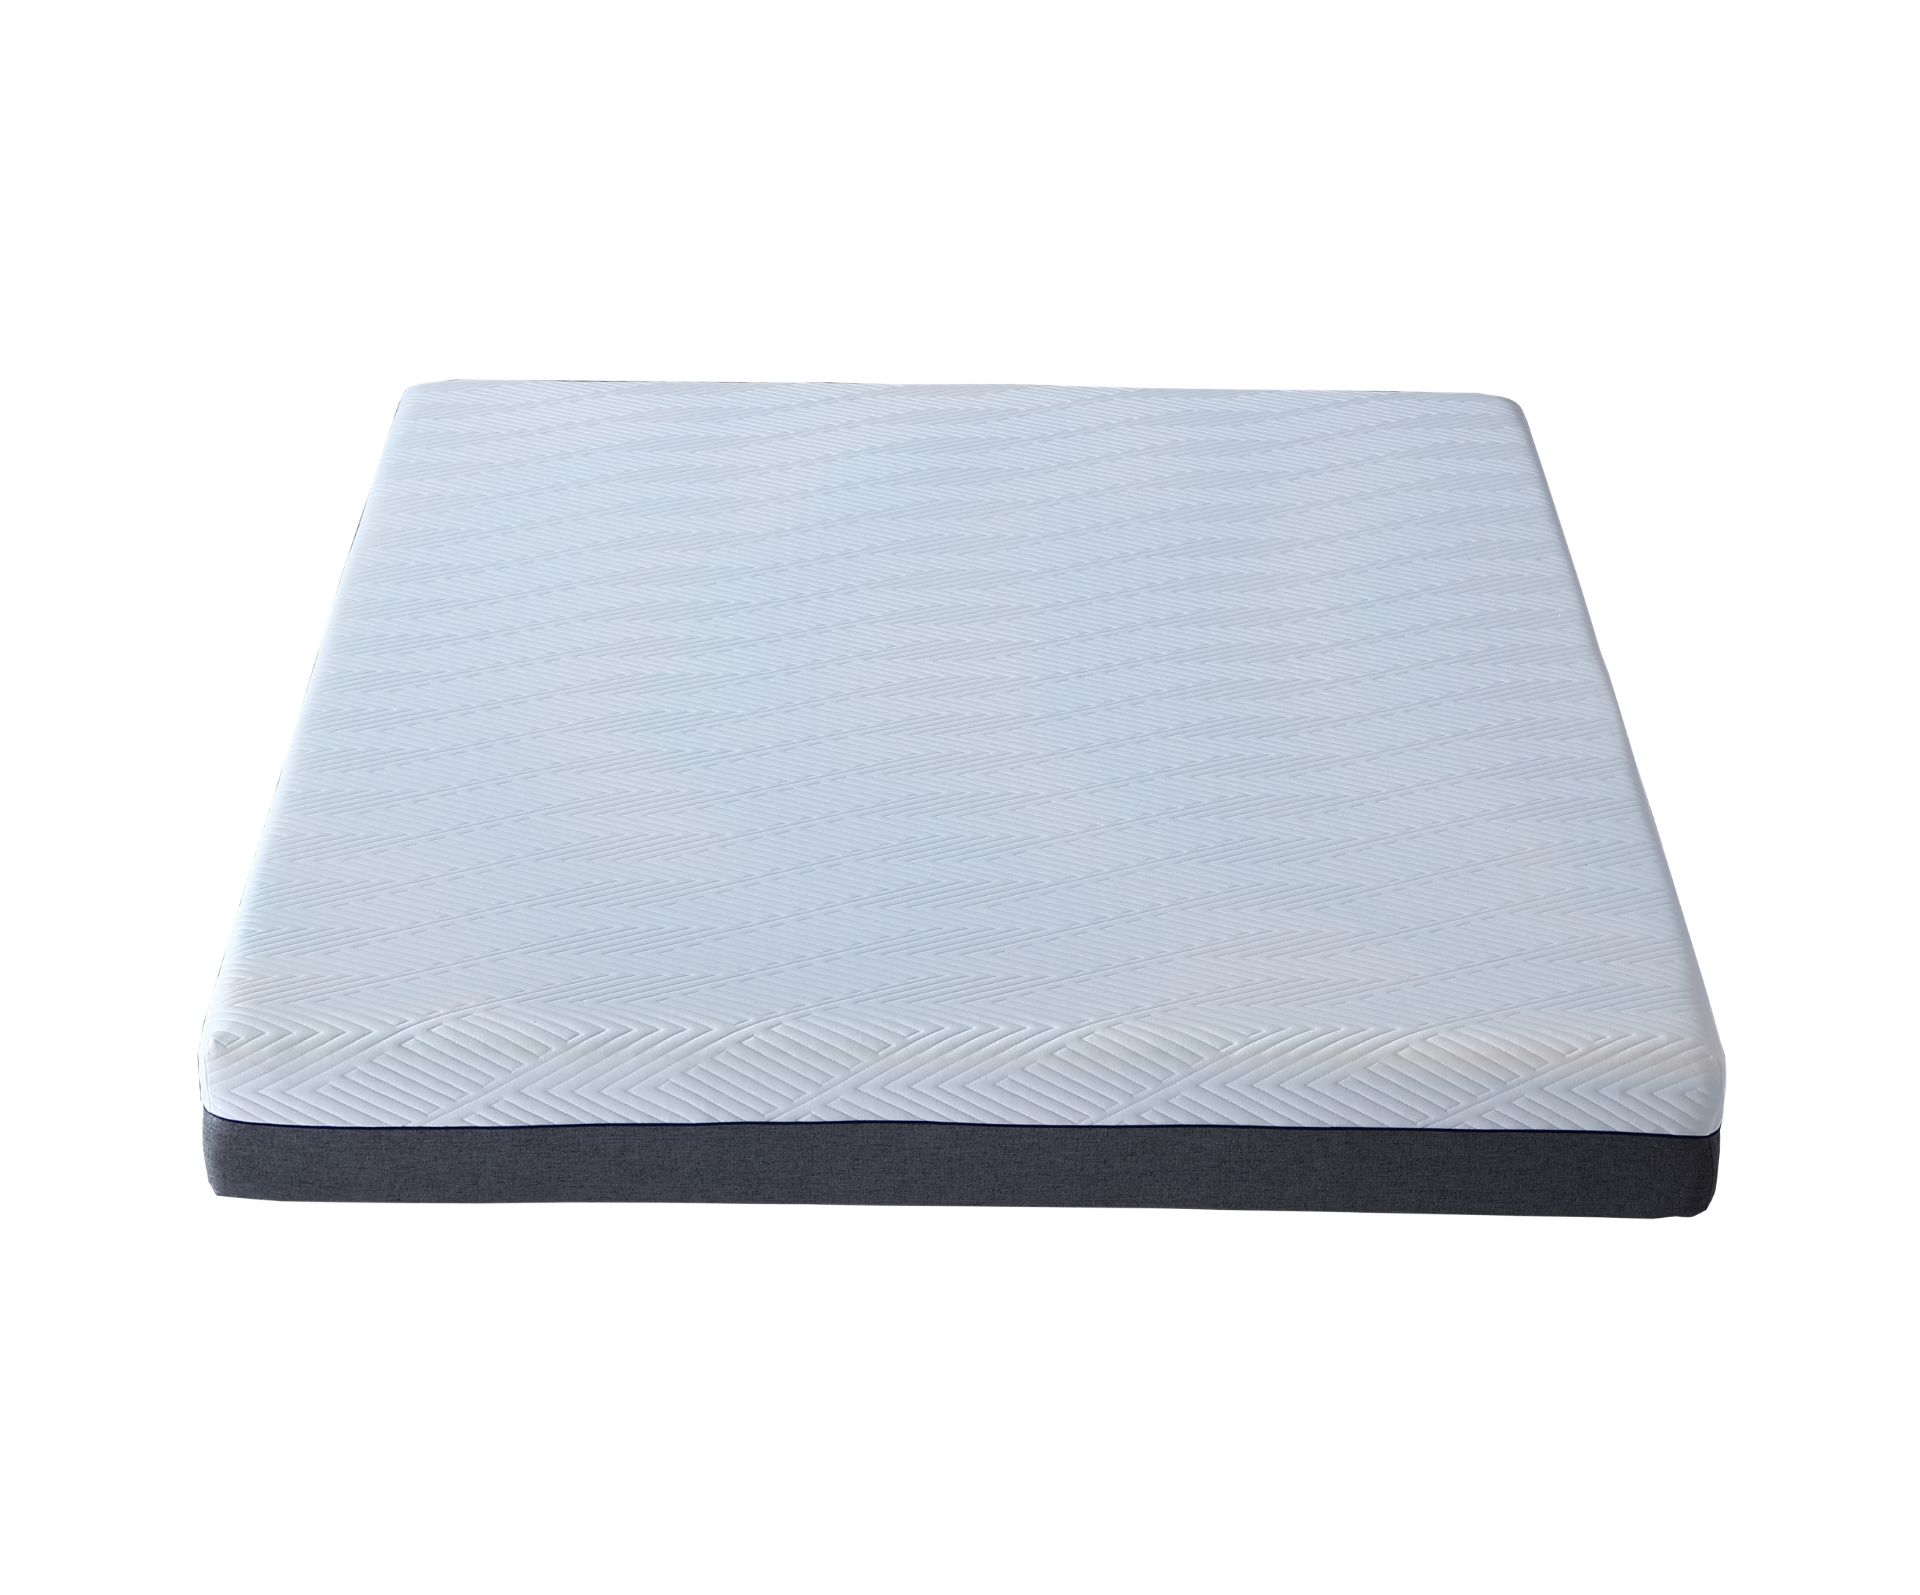 AIRFLEX Firmness-Adjustable Mattress with Washable Cover in Single Size